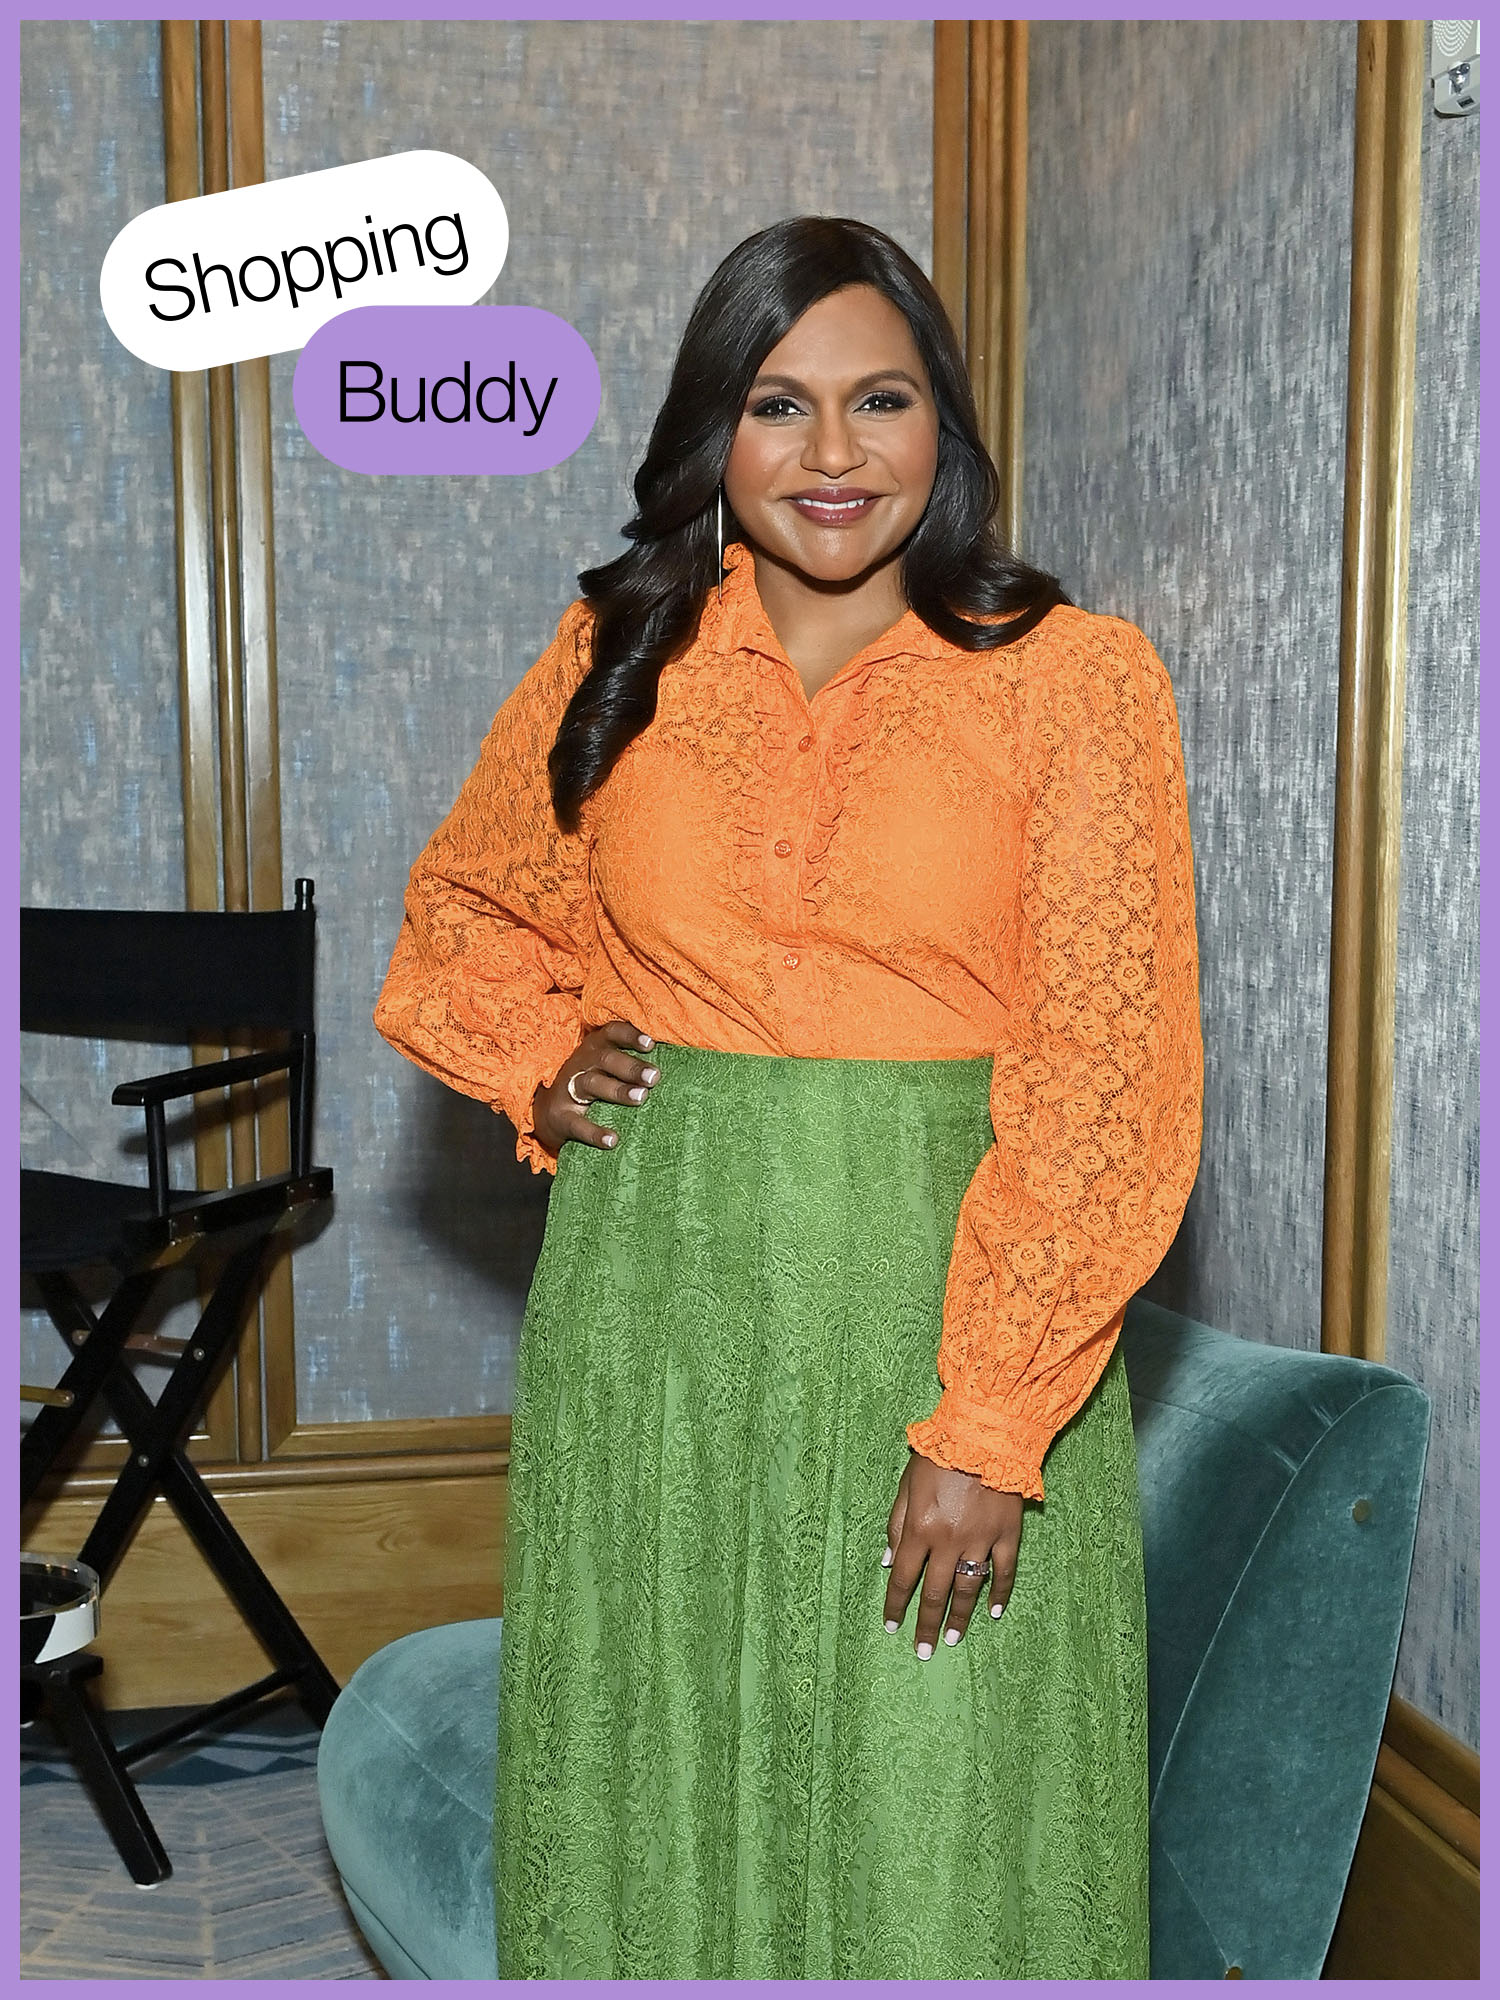 Mindy Kaling in a orange top and green skirt with the words Shopping Buddy